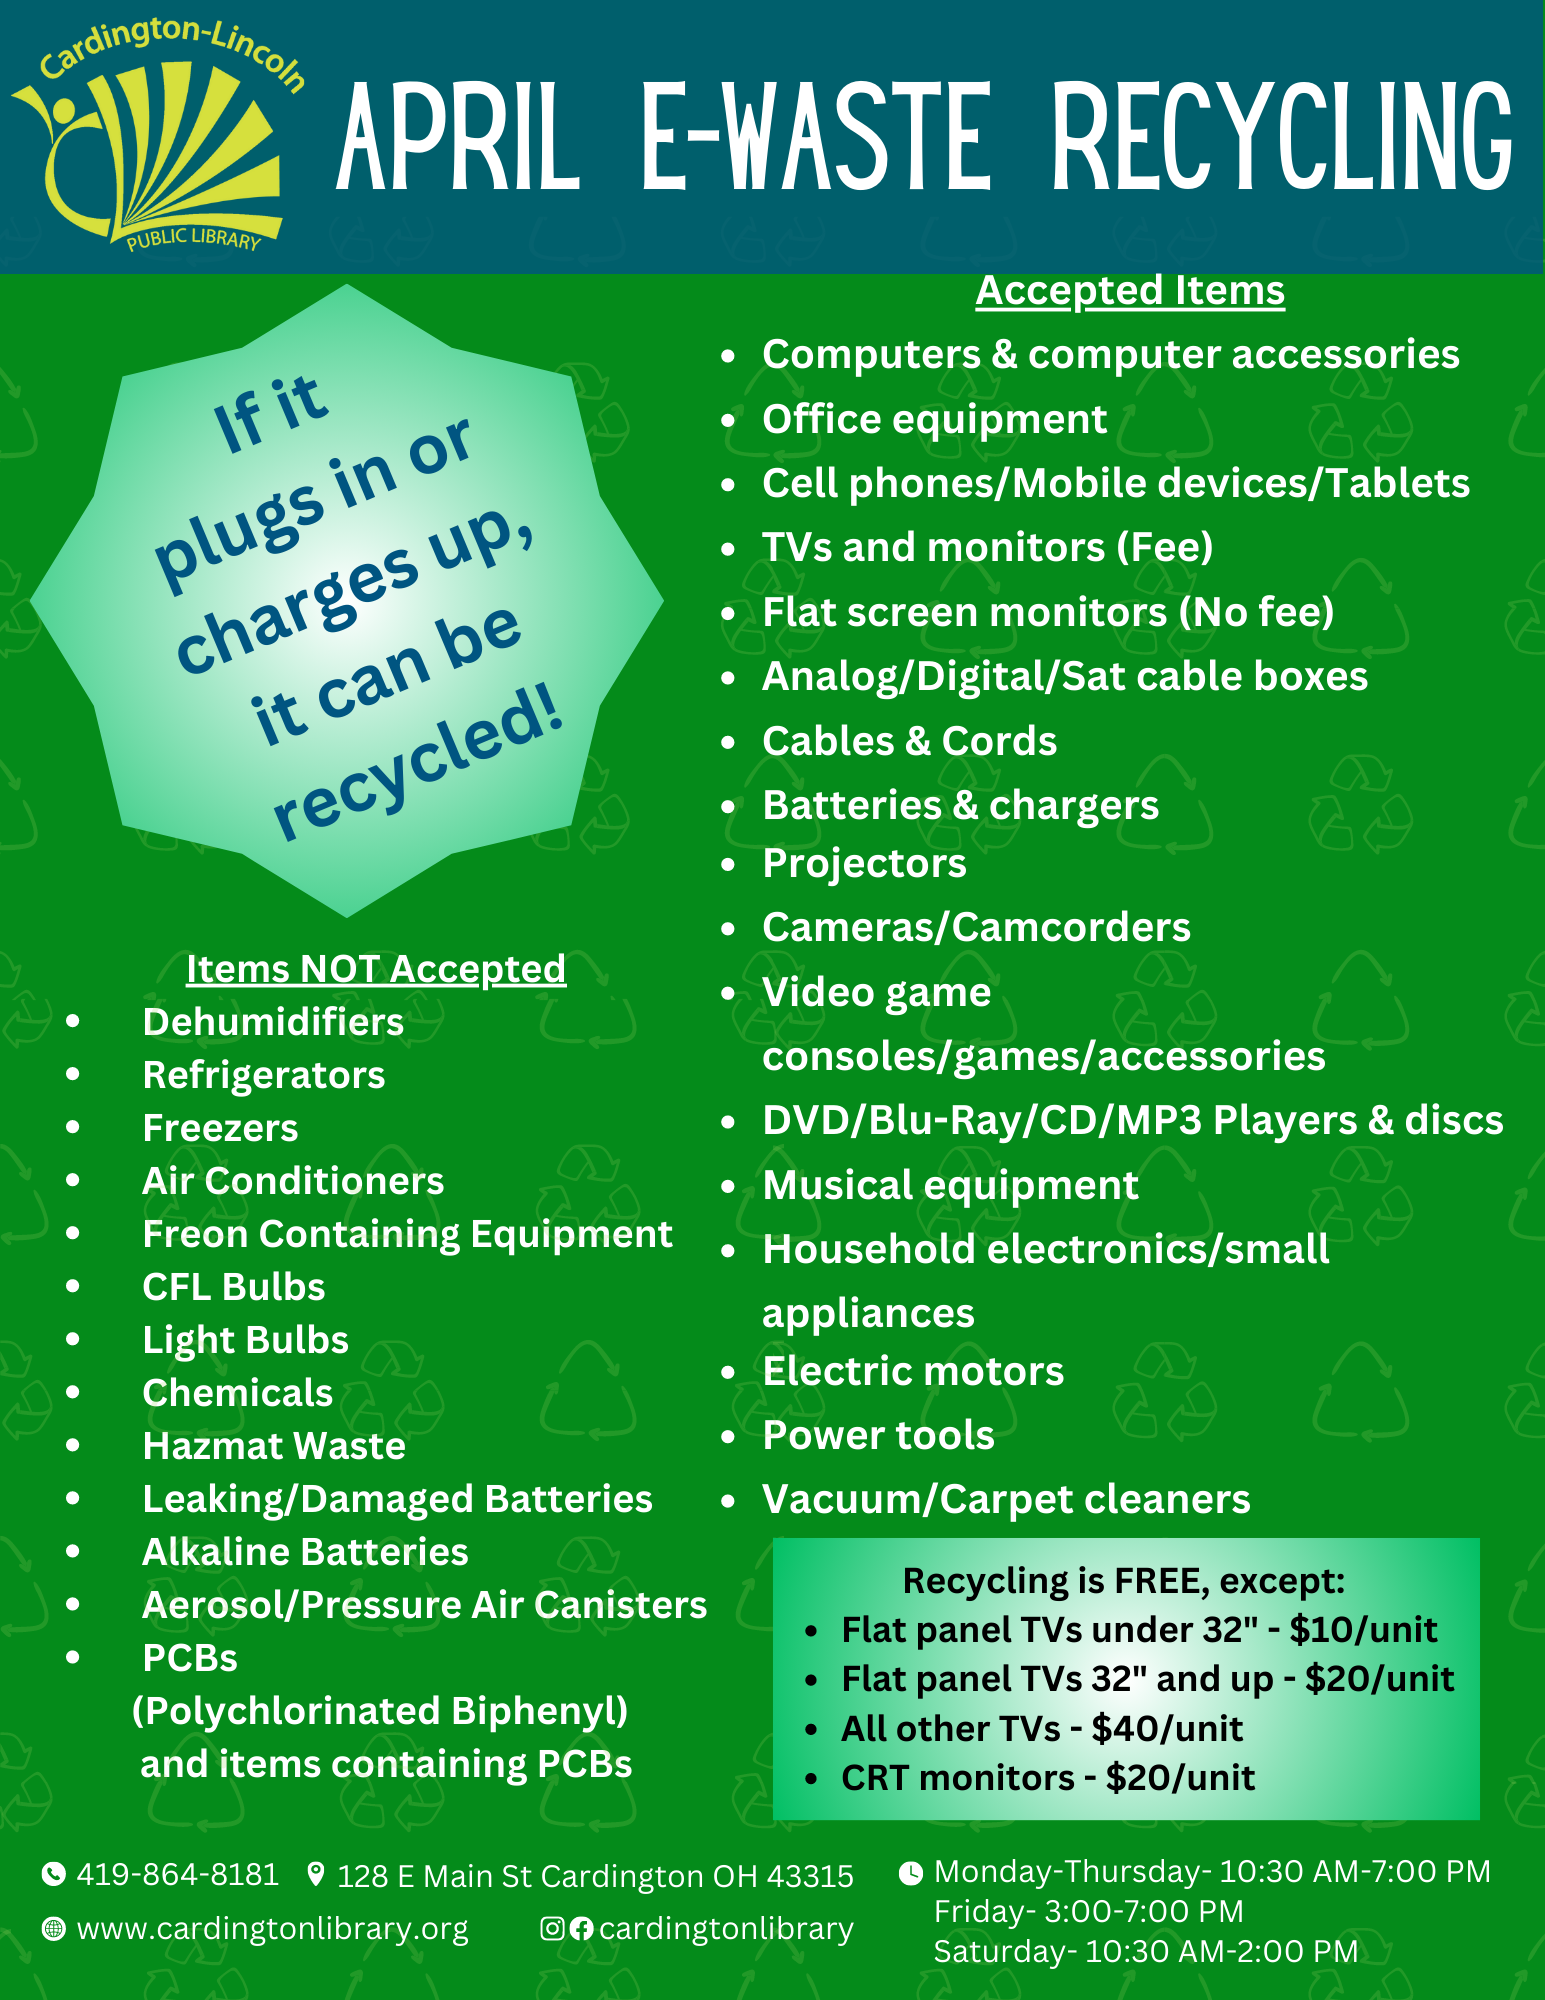 April E-Waste Recycling at the Library - list of items 